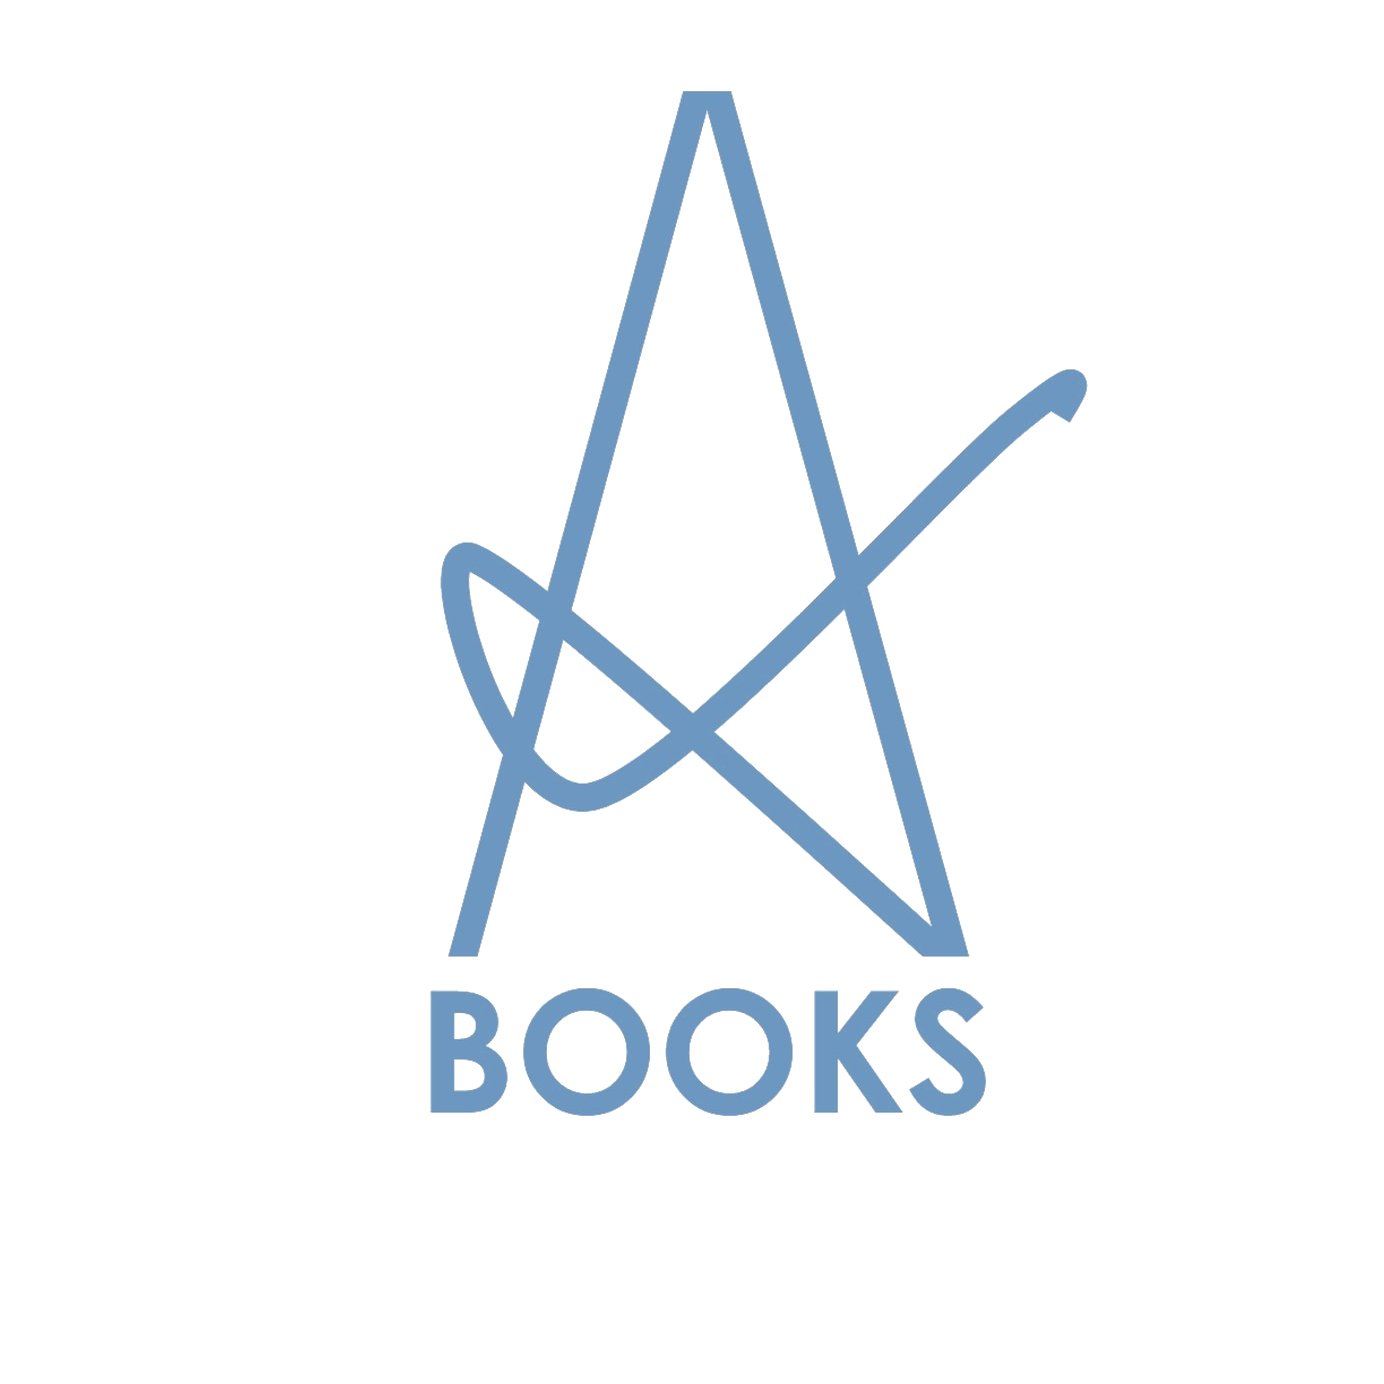 ADELAIDE BOOKS is a New York based independent company dedicated to publishing literary fiction and creative nonfiction.